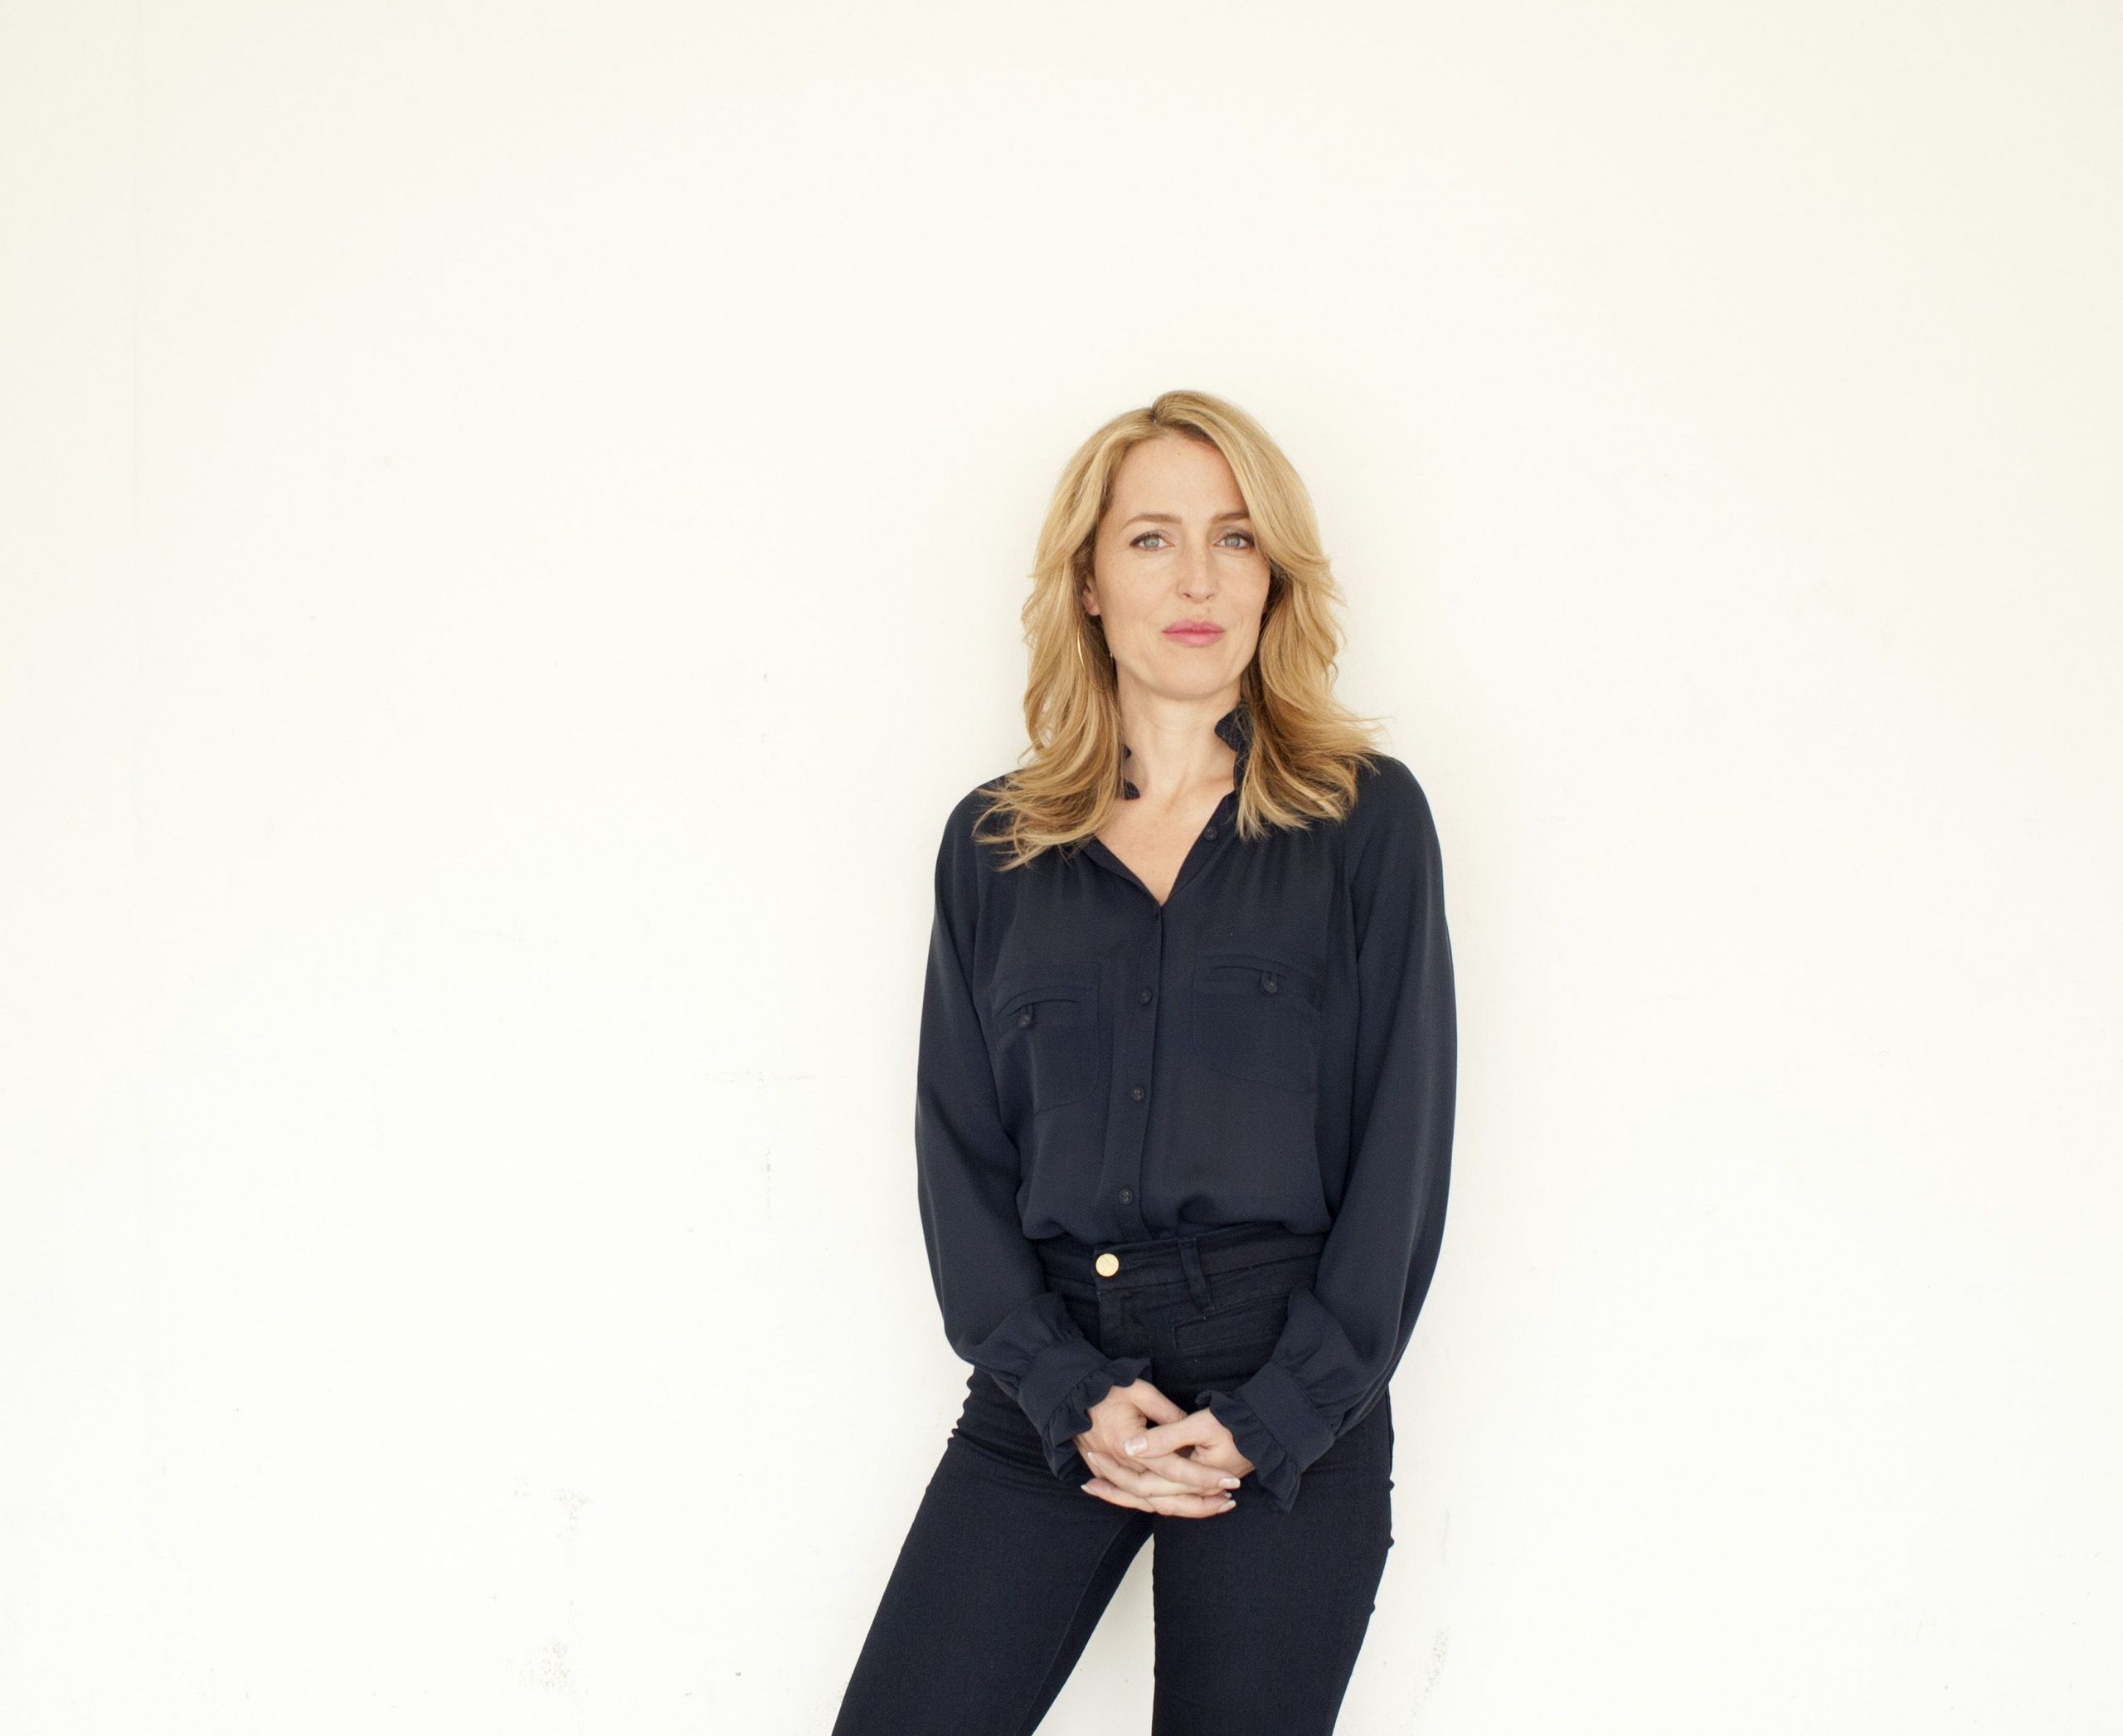 Gillian Anderson Images on Fanpop.